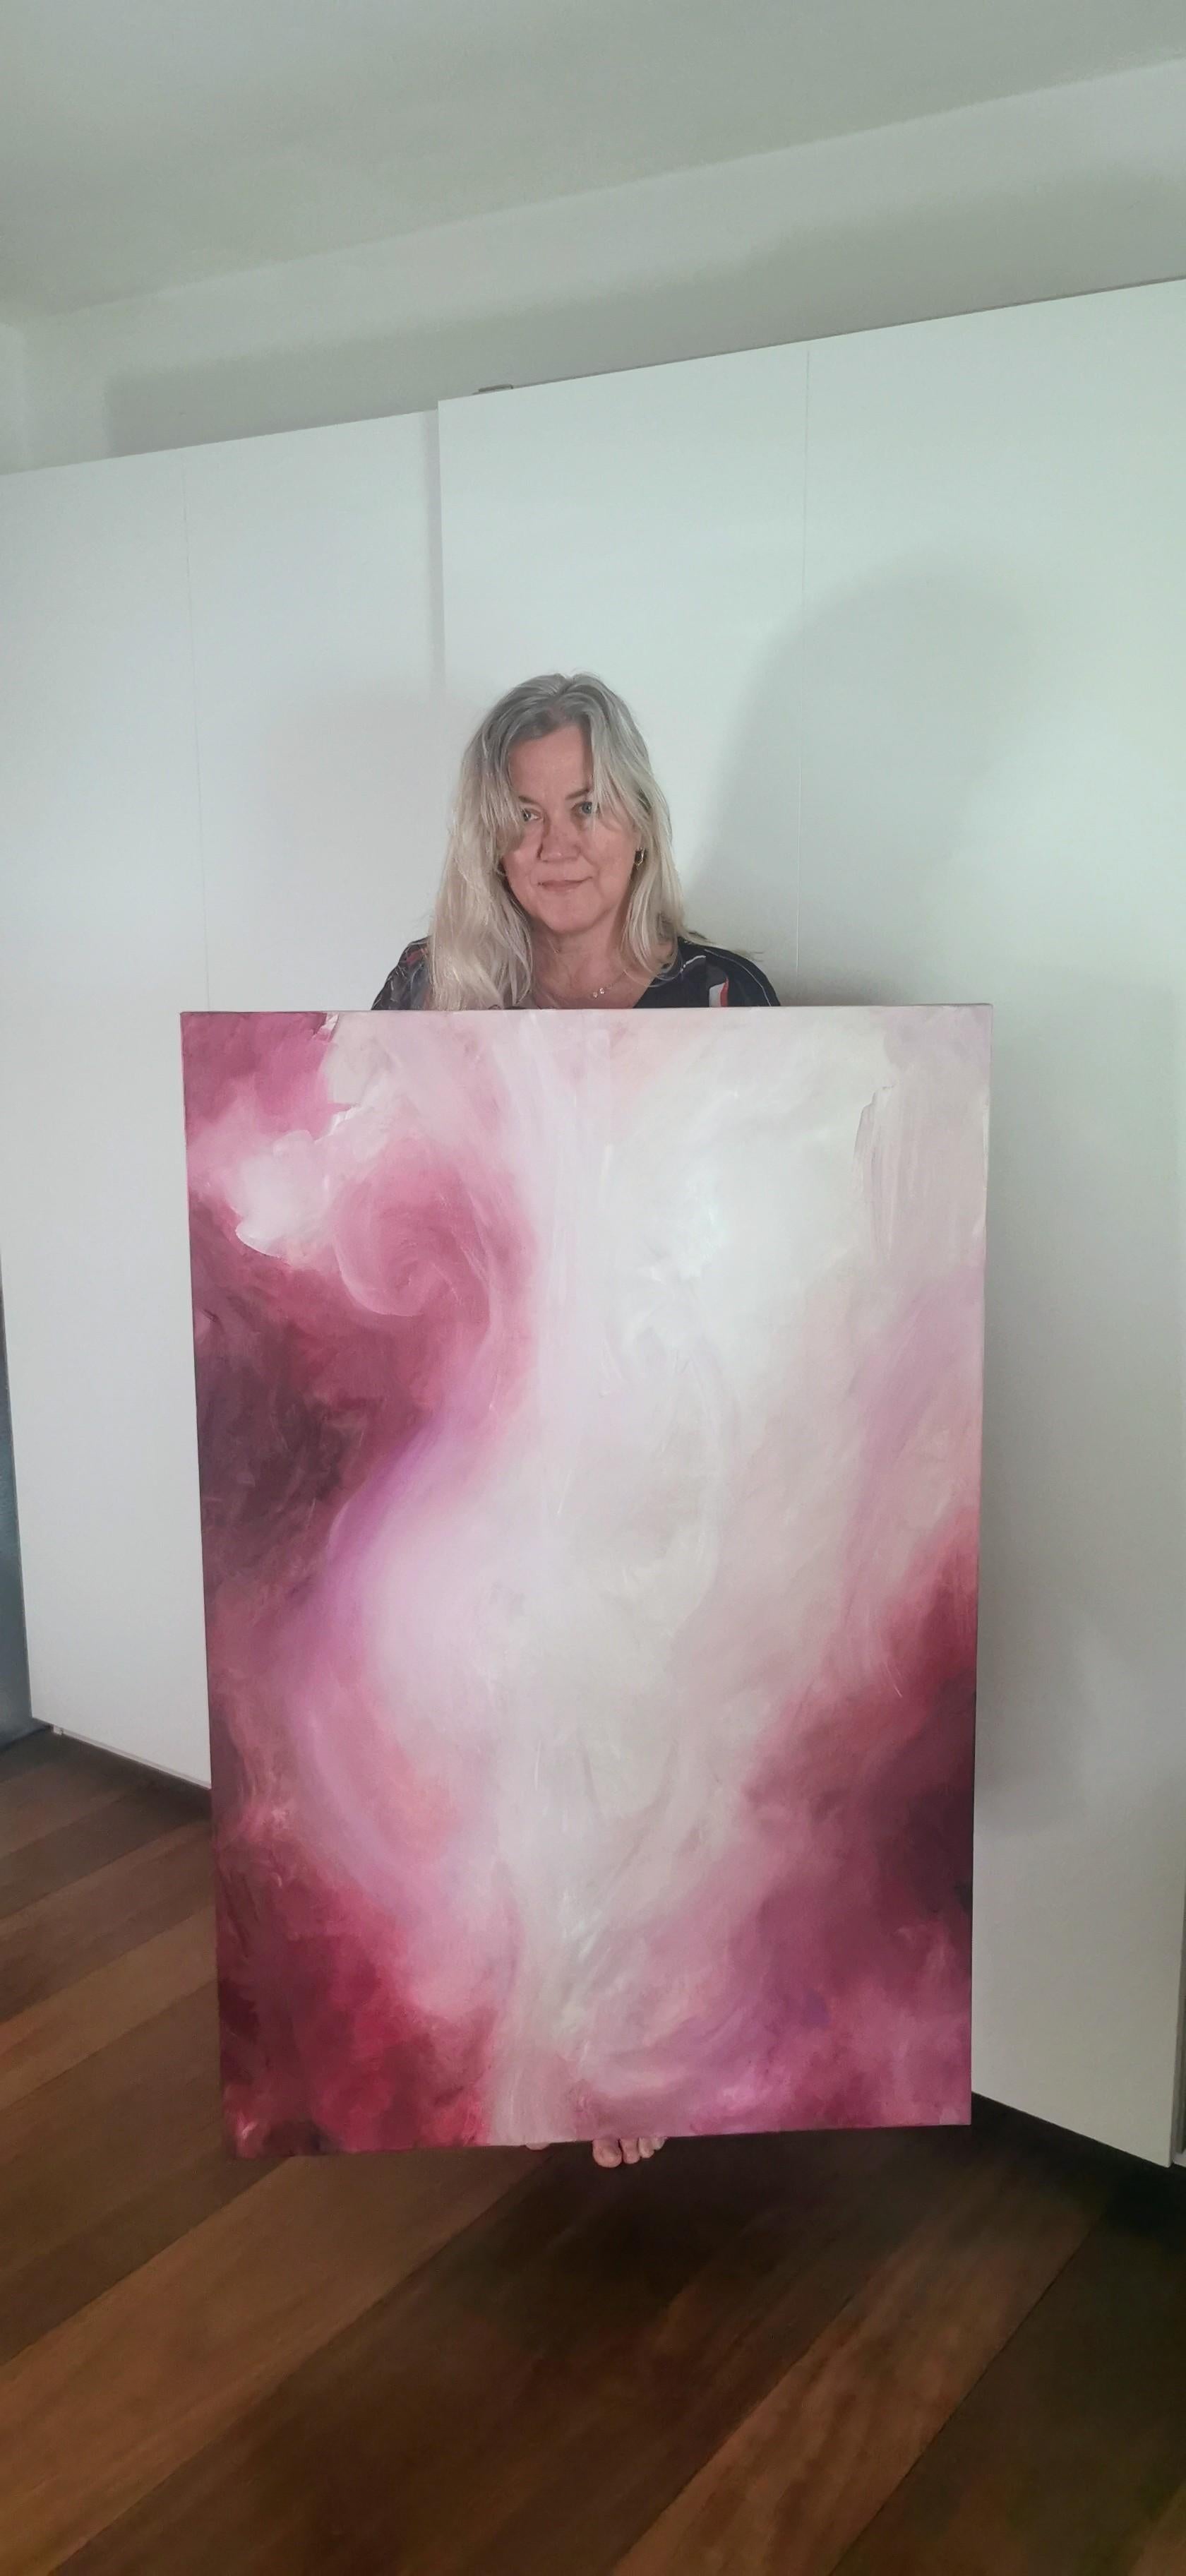 In creating this piece, I dove deeply into the abstract realm, allowing emotion to guide each stroke. The oil paints blend into a fervent dance of color, embodying passion, desire, and the yearning for something beyond grasp. The sweeping motions